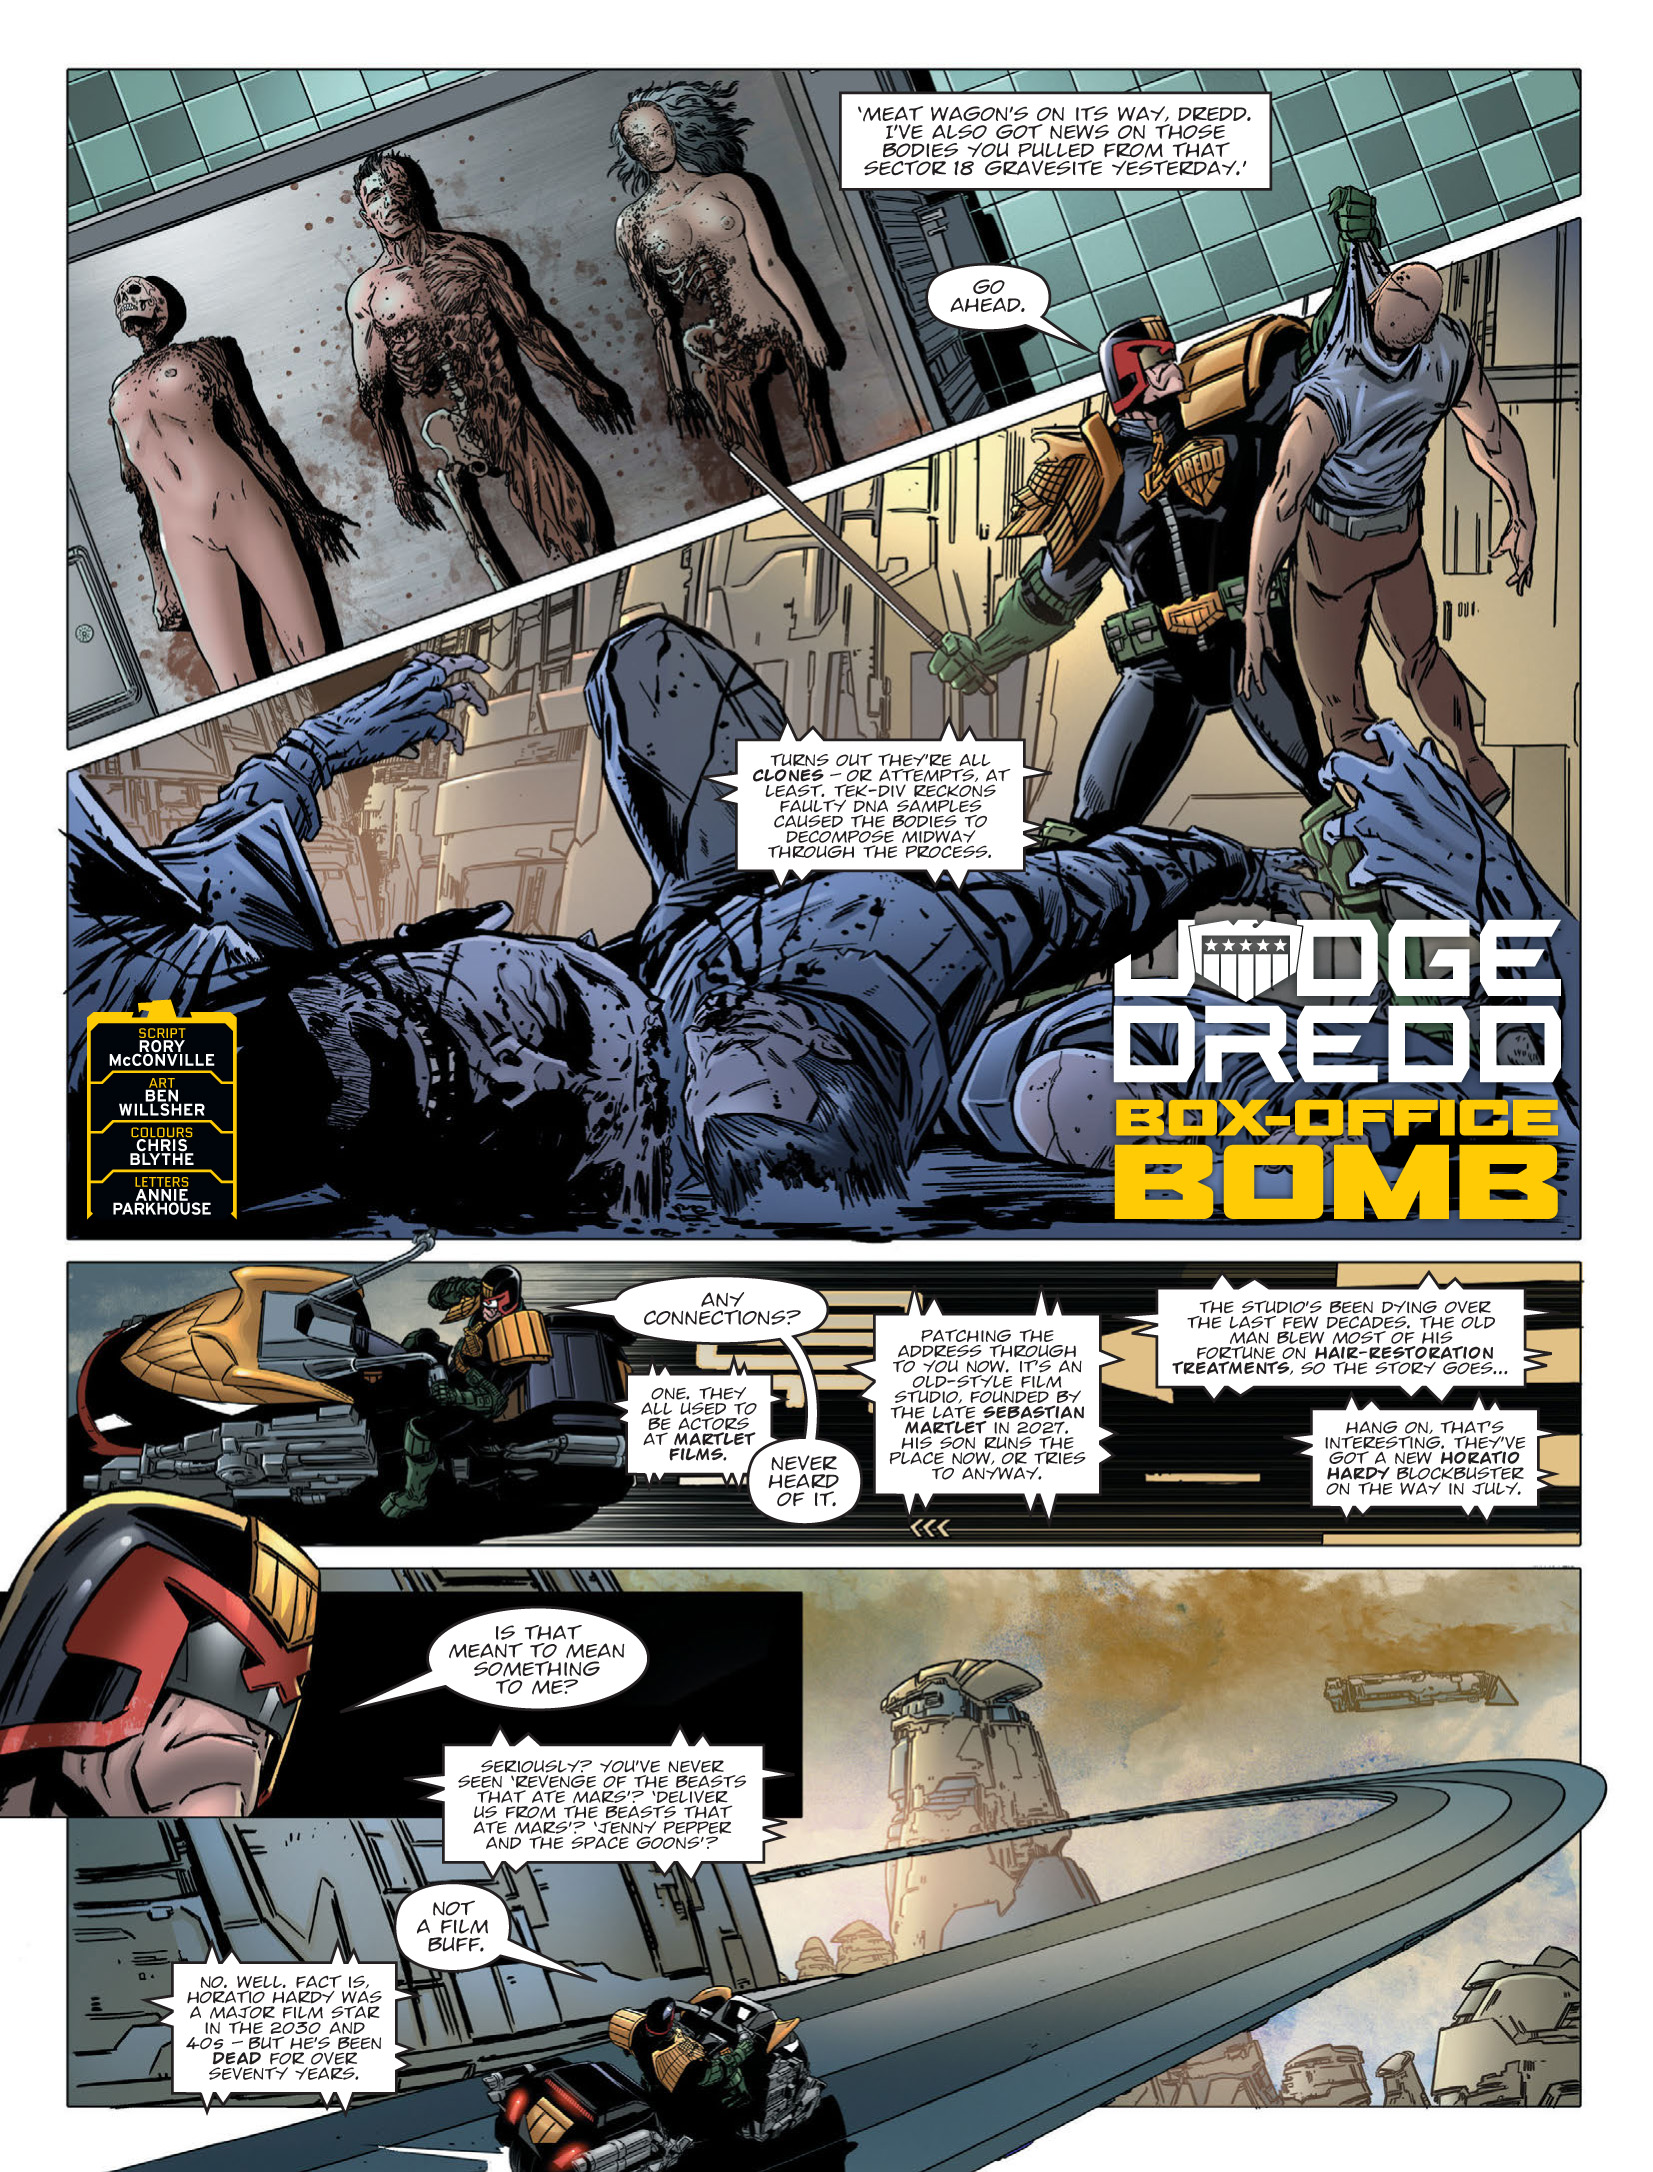 2000 AD: Chapter 2039 - Page 3